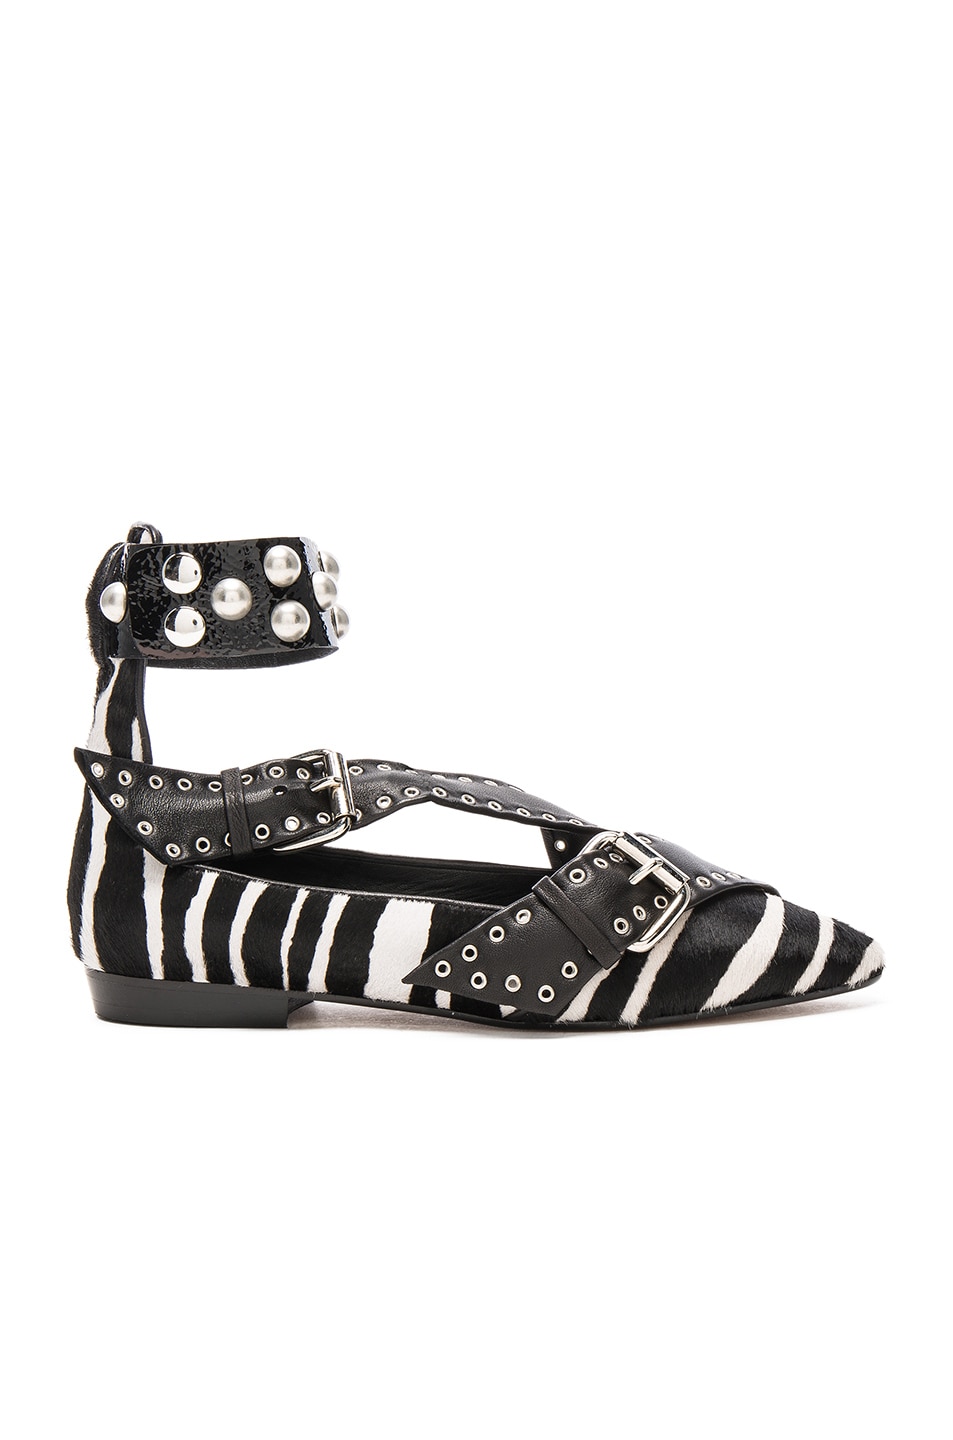 Image 1 of Isabel Marant Calf Hair Linzy Eyelet Flats in Black & White